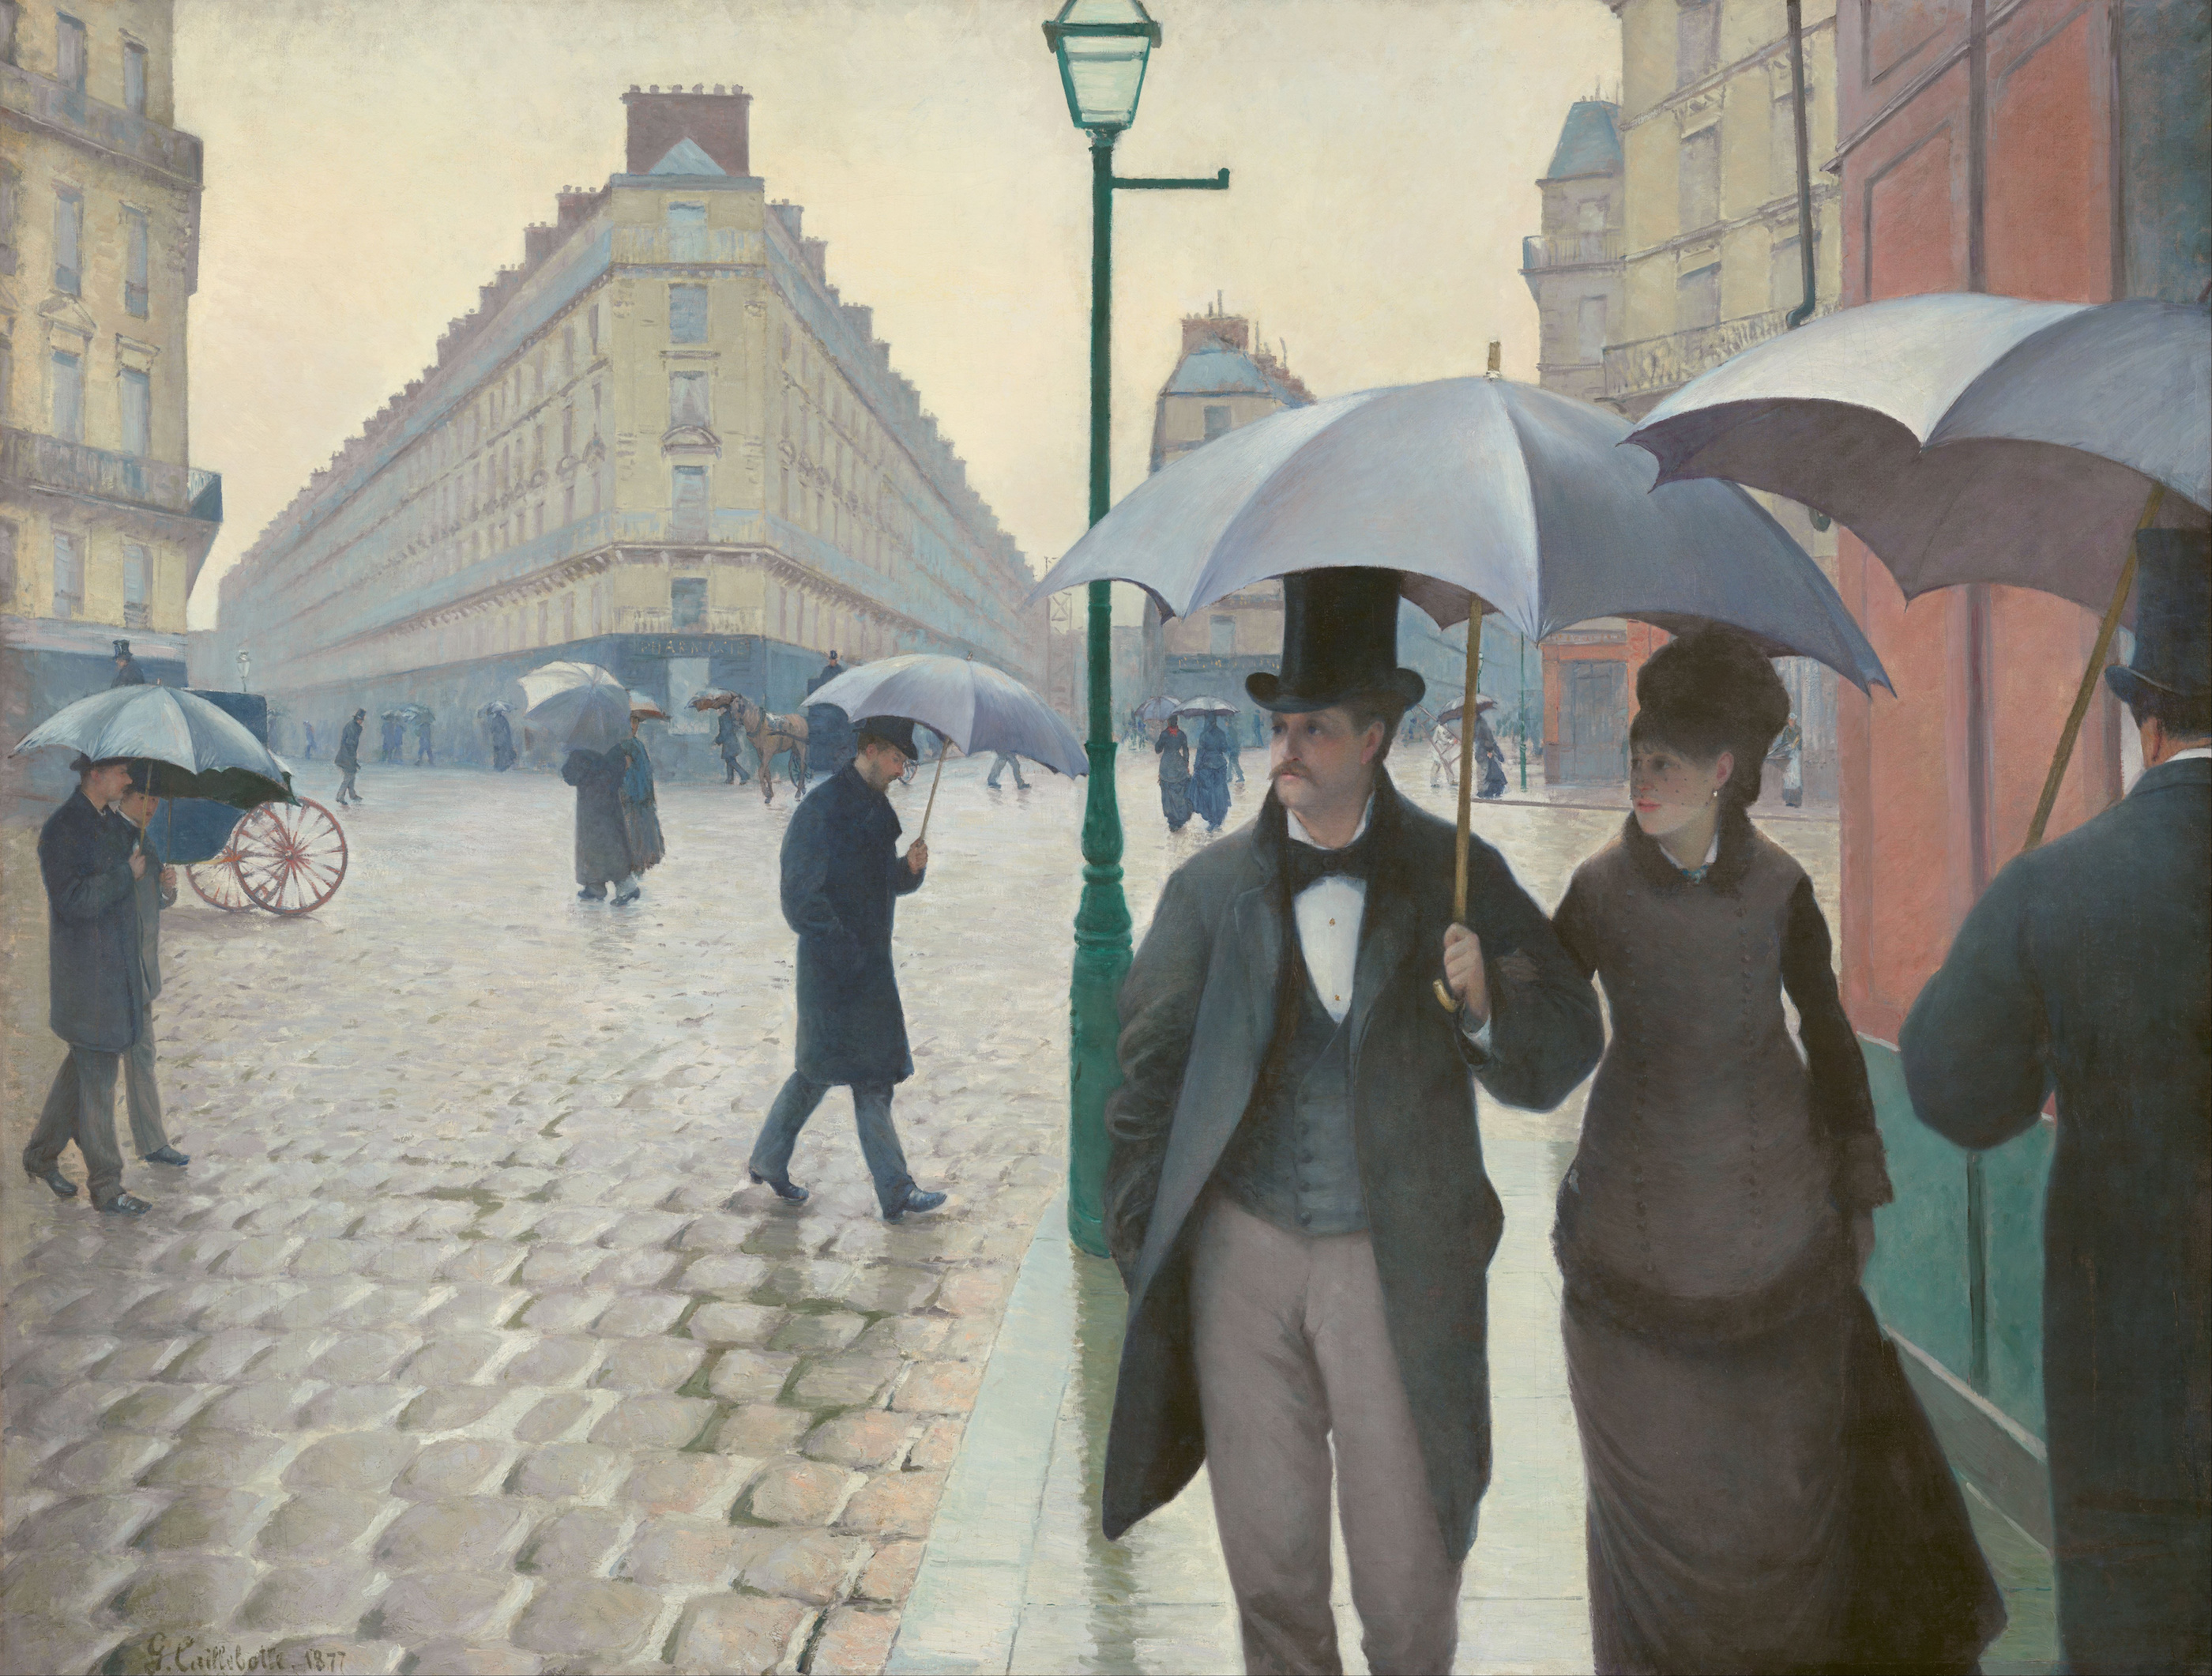 Paris Street in Rainy Weather by Gustave Caillebotte - 1877 - 212,2 x 276,2 cm Art Institute of Chicago